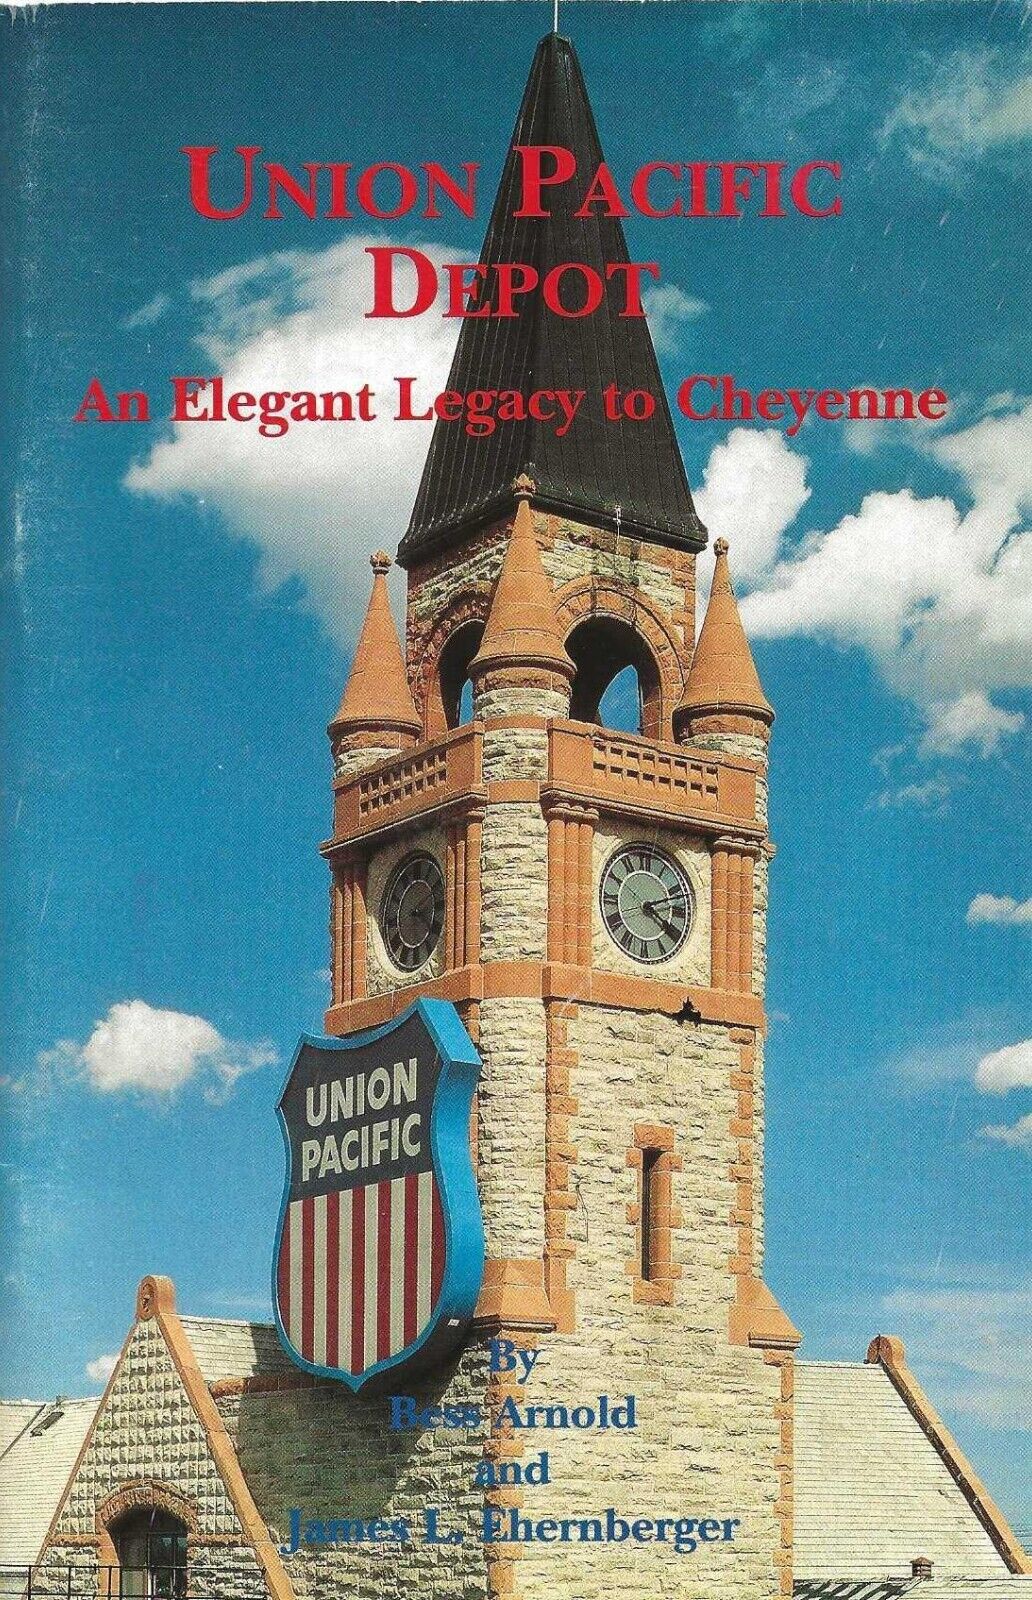 Union Pacific Depot - An Elegant Legacy to Cheyenne - signed